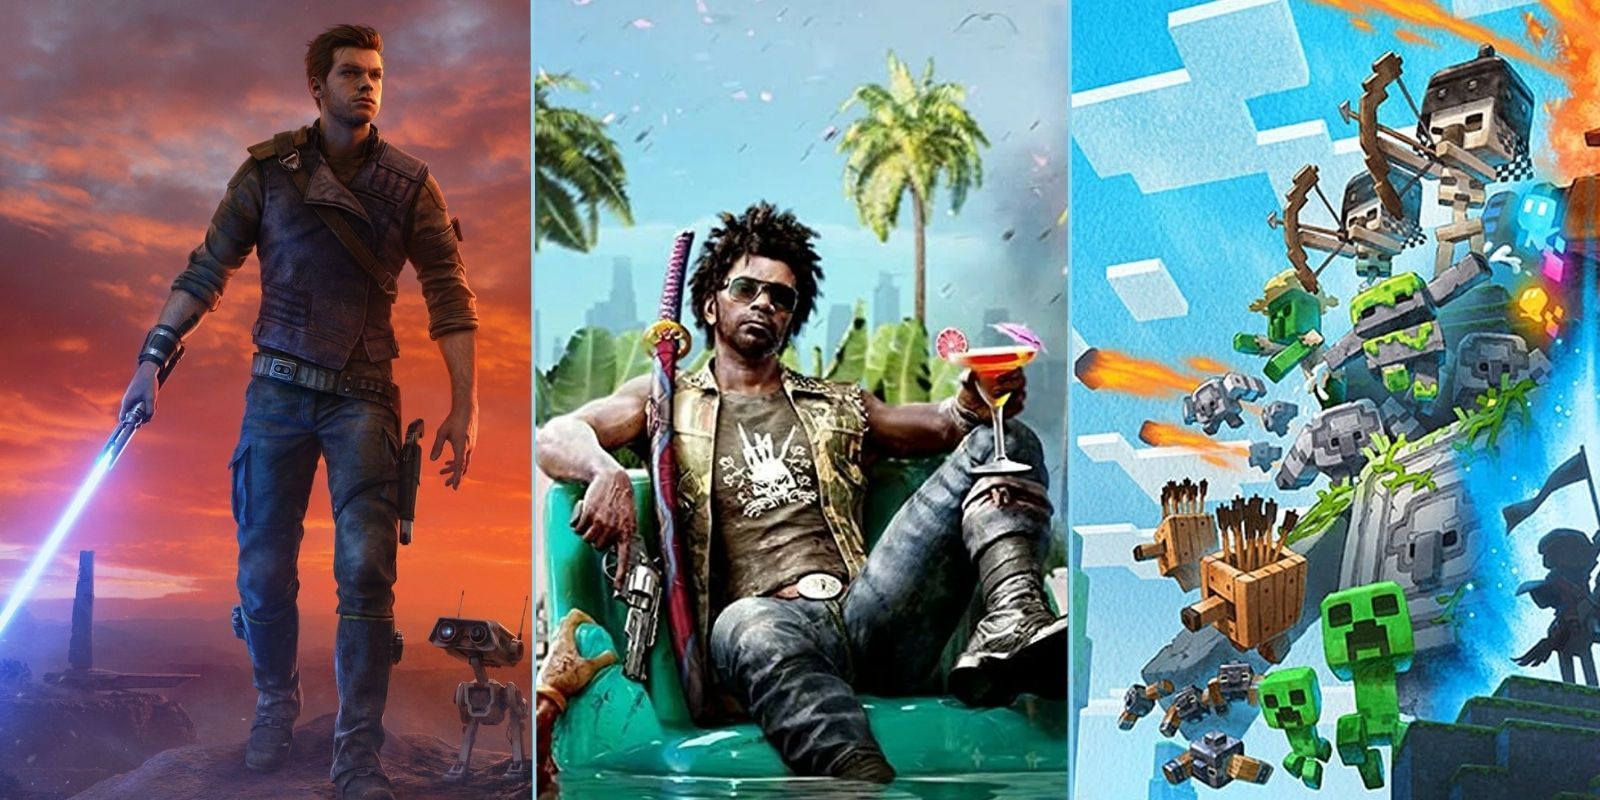 April 2023 Video game releases featuring covers of Star Wars Jedi: Survivor, Dead Island 2, and Minecraft Legends 